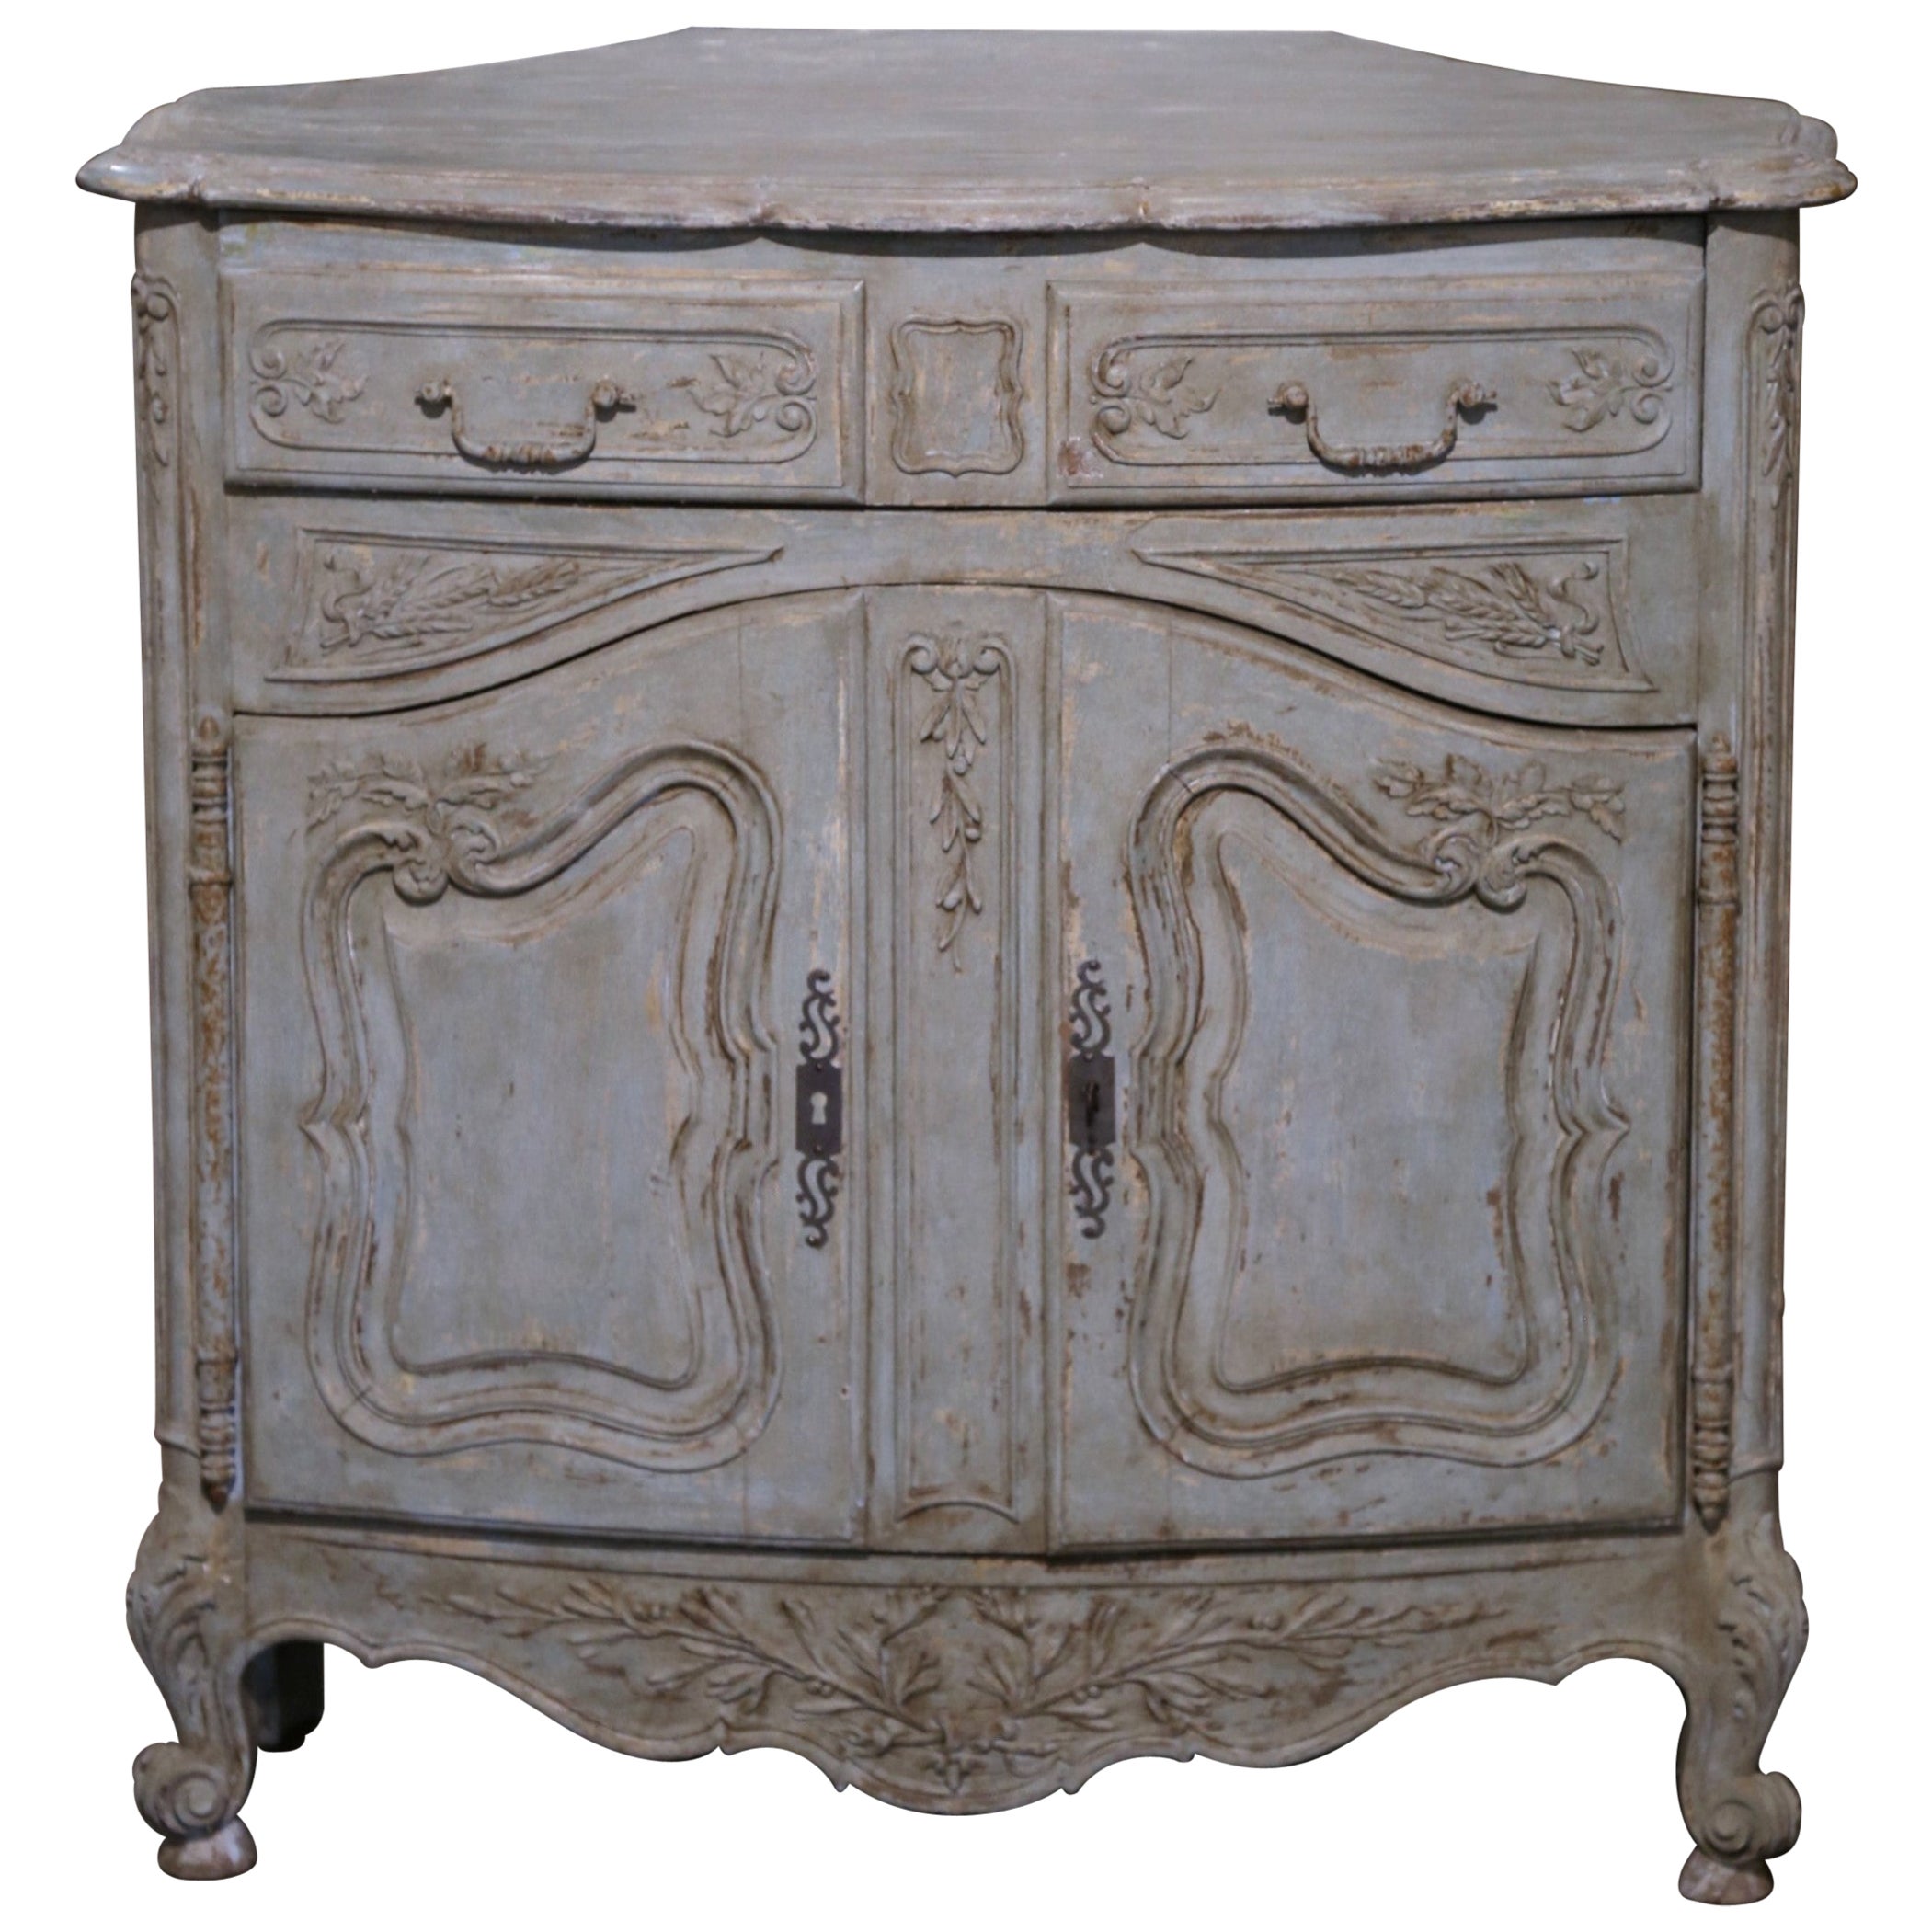 19th Century French Louis XV Carved Painted Corner Cabinet from Provence